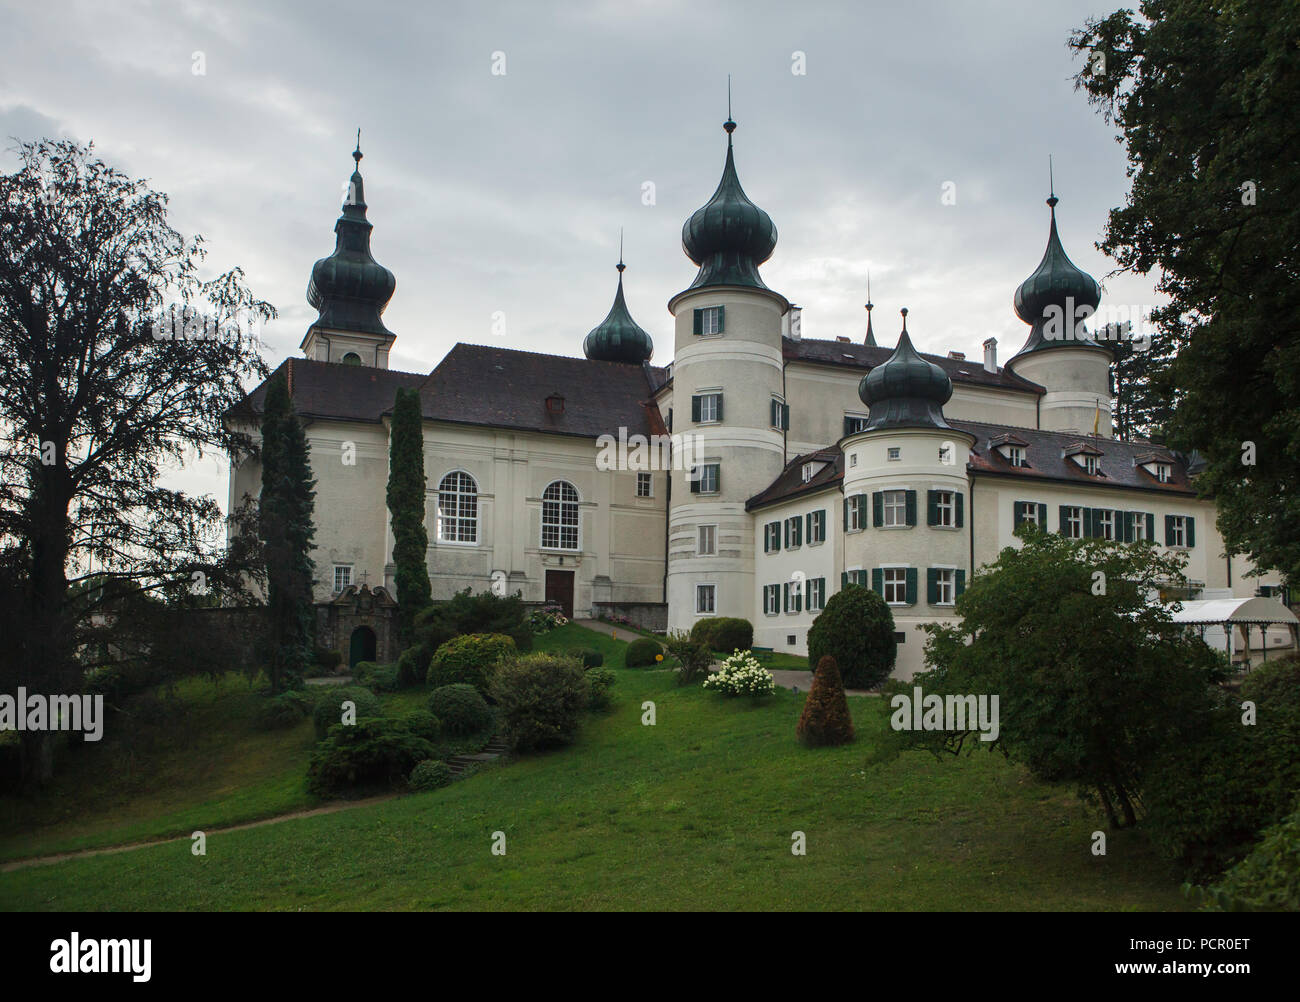 Artstetten Castle (Schloss Artstetten) in Artstetten-Pöbring in Lower Austria, Austria. Archduke Franz Ferdinand of Austria and his family lived in this castle. He and his wife Duchess Sophie of Hohenberg were buried here after they were assassinated in Sarajevo on 28 June 1914. Stock Photo